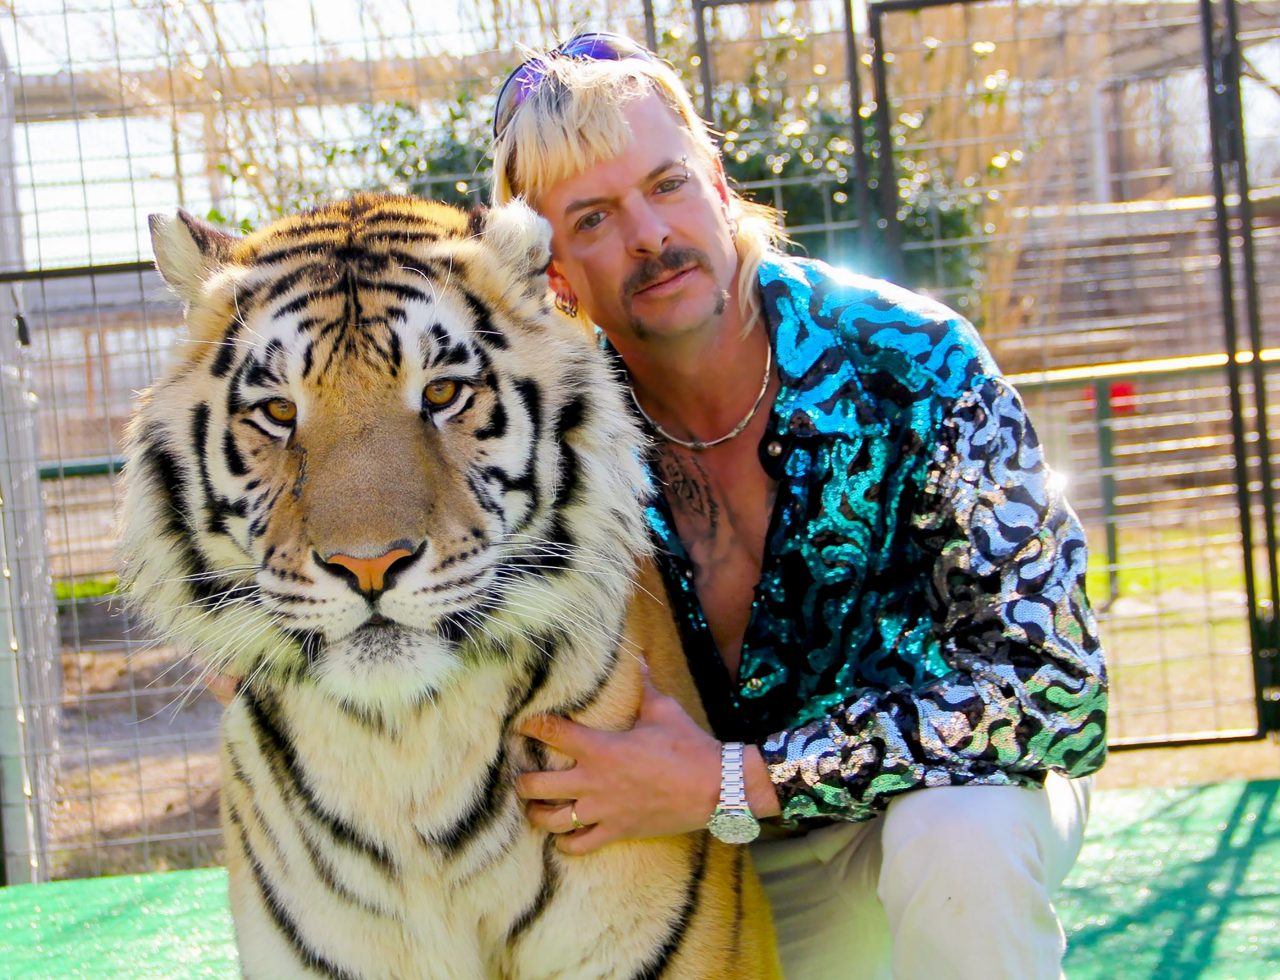 ‘Tiger King’ Joe Exotic Allegedly Didn’t Sing His Own Songs